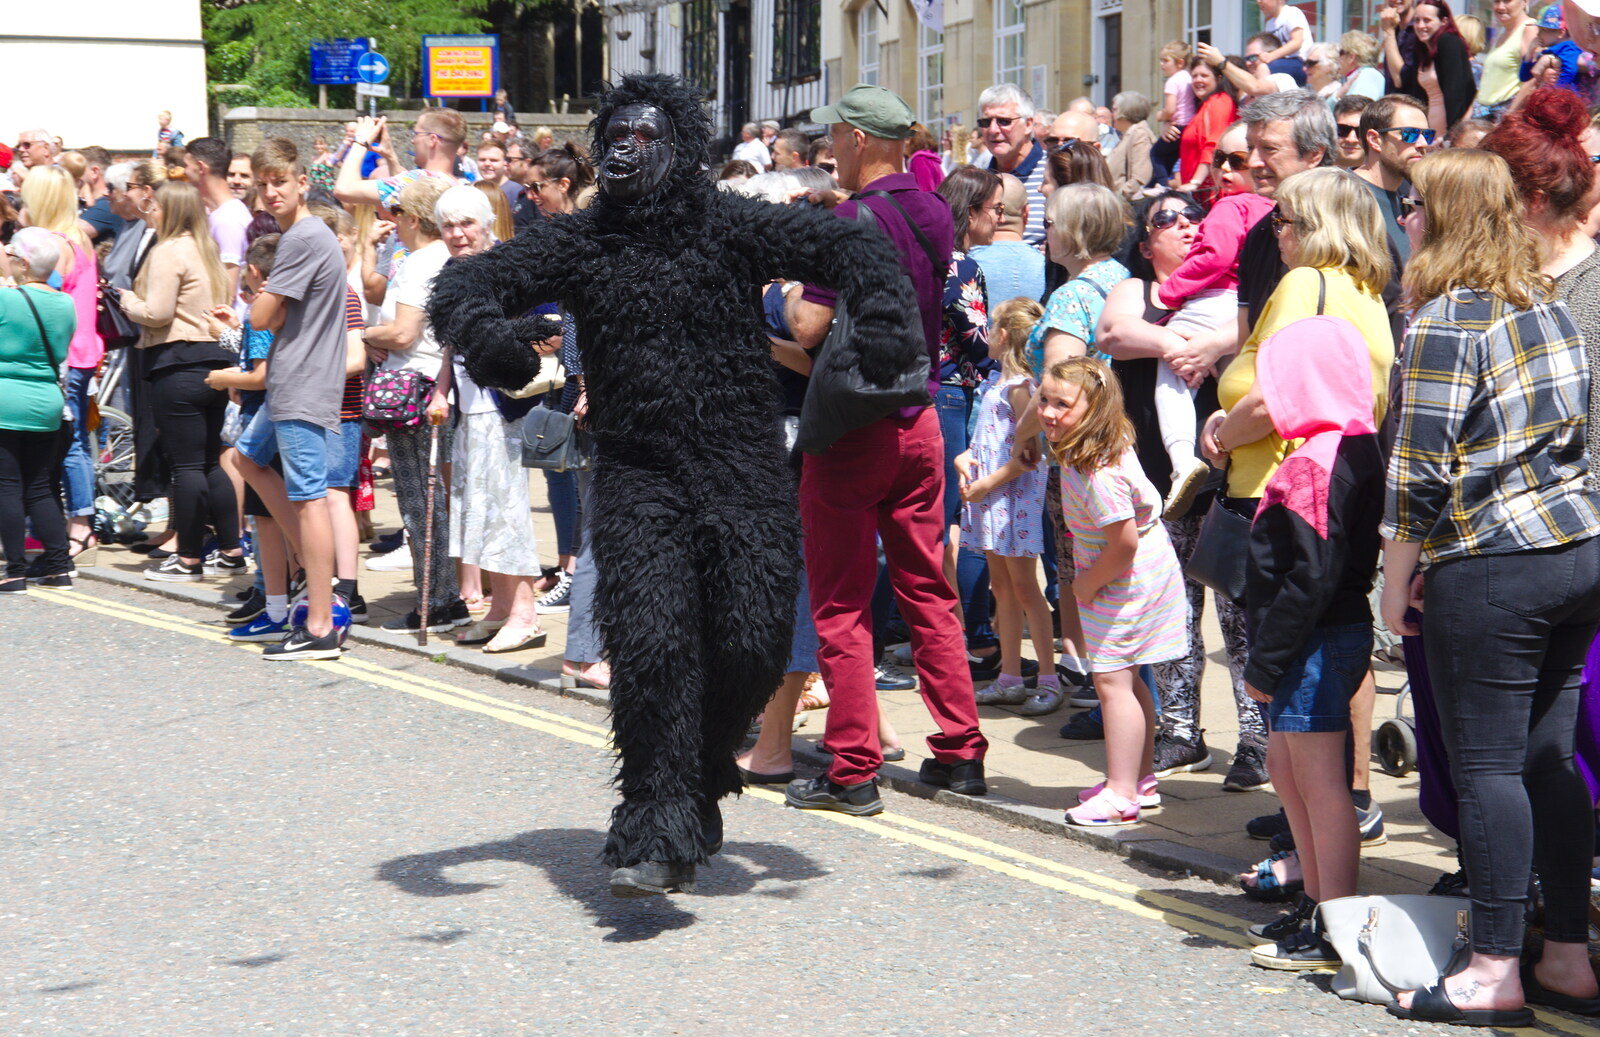 There's a gorilla on the loose from The Diss Carnival 2019, Diss, Norfolk - 9th June 2019